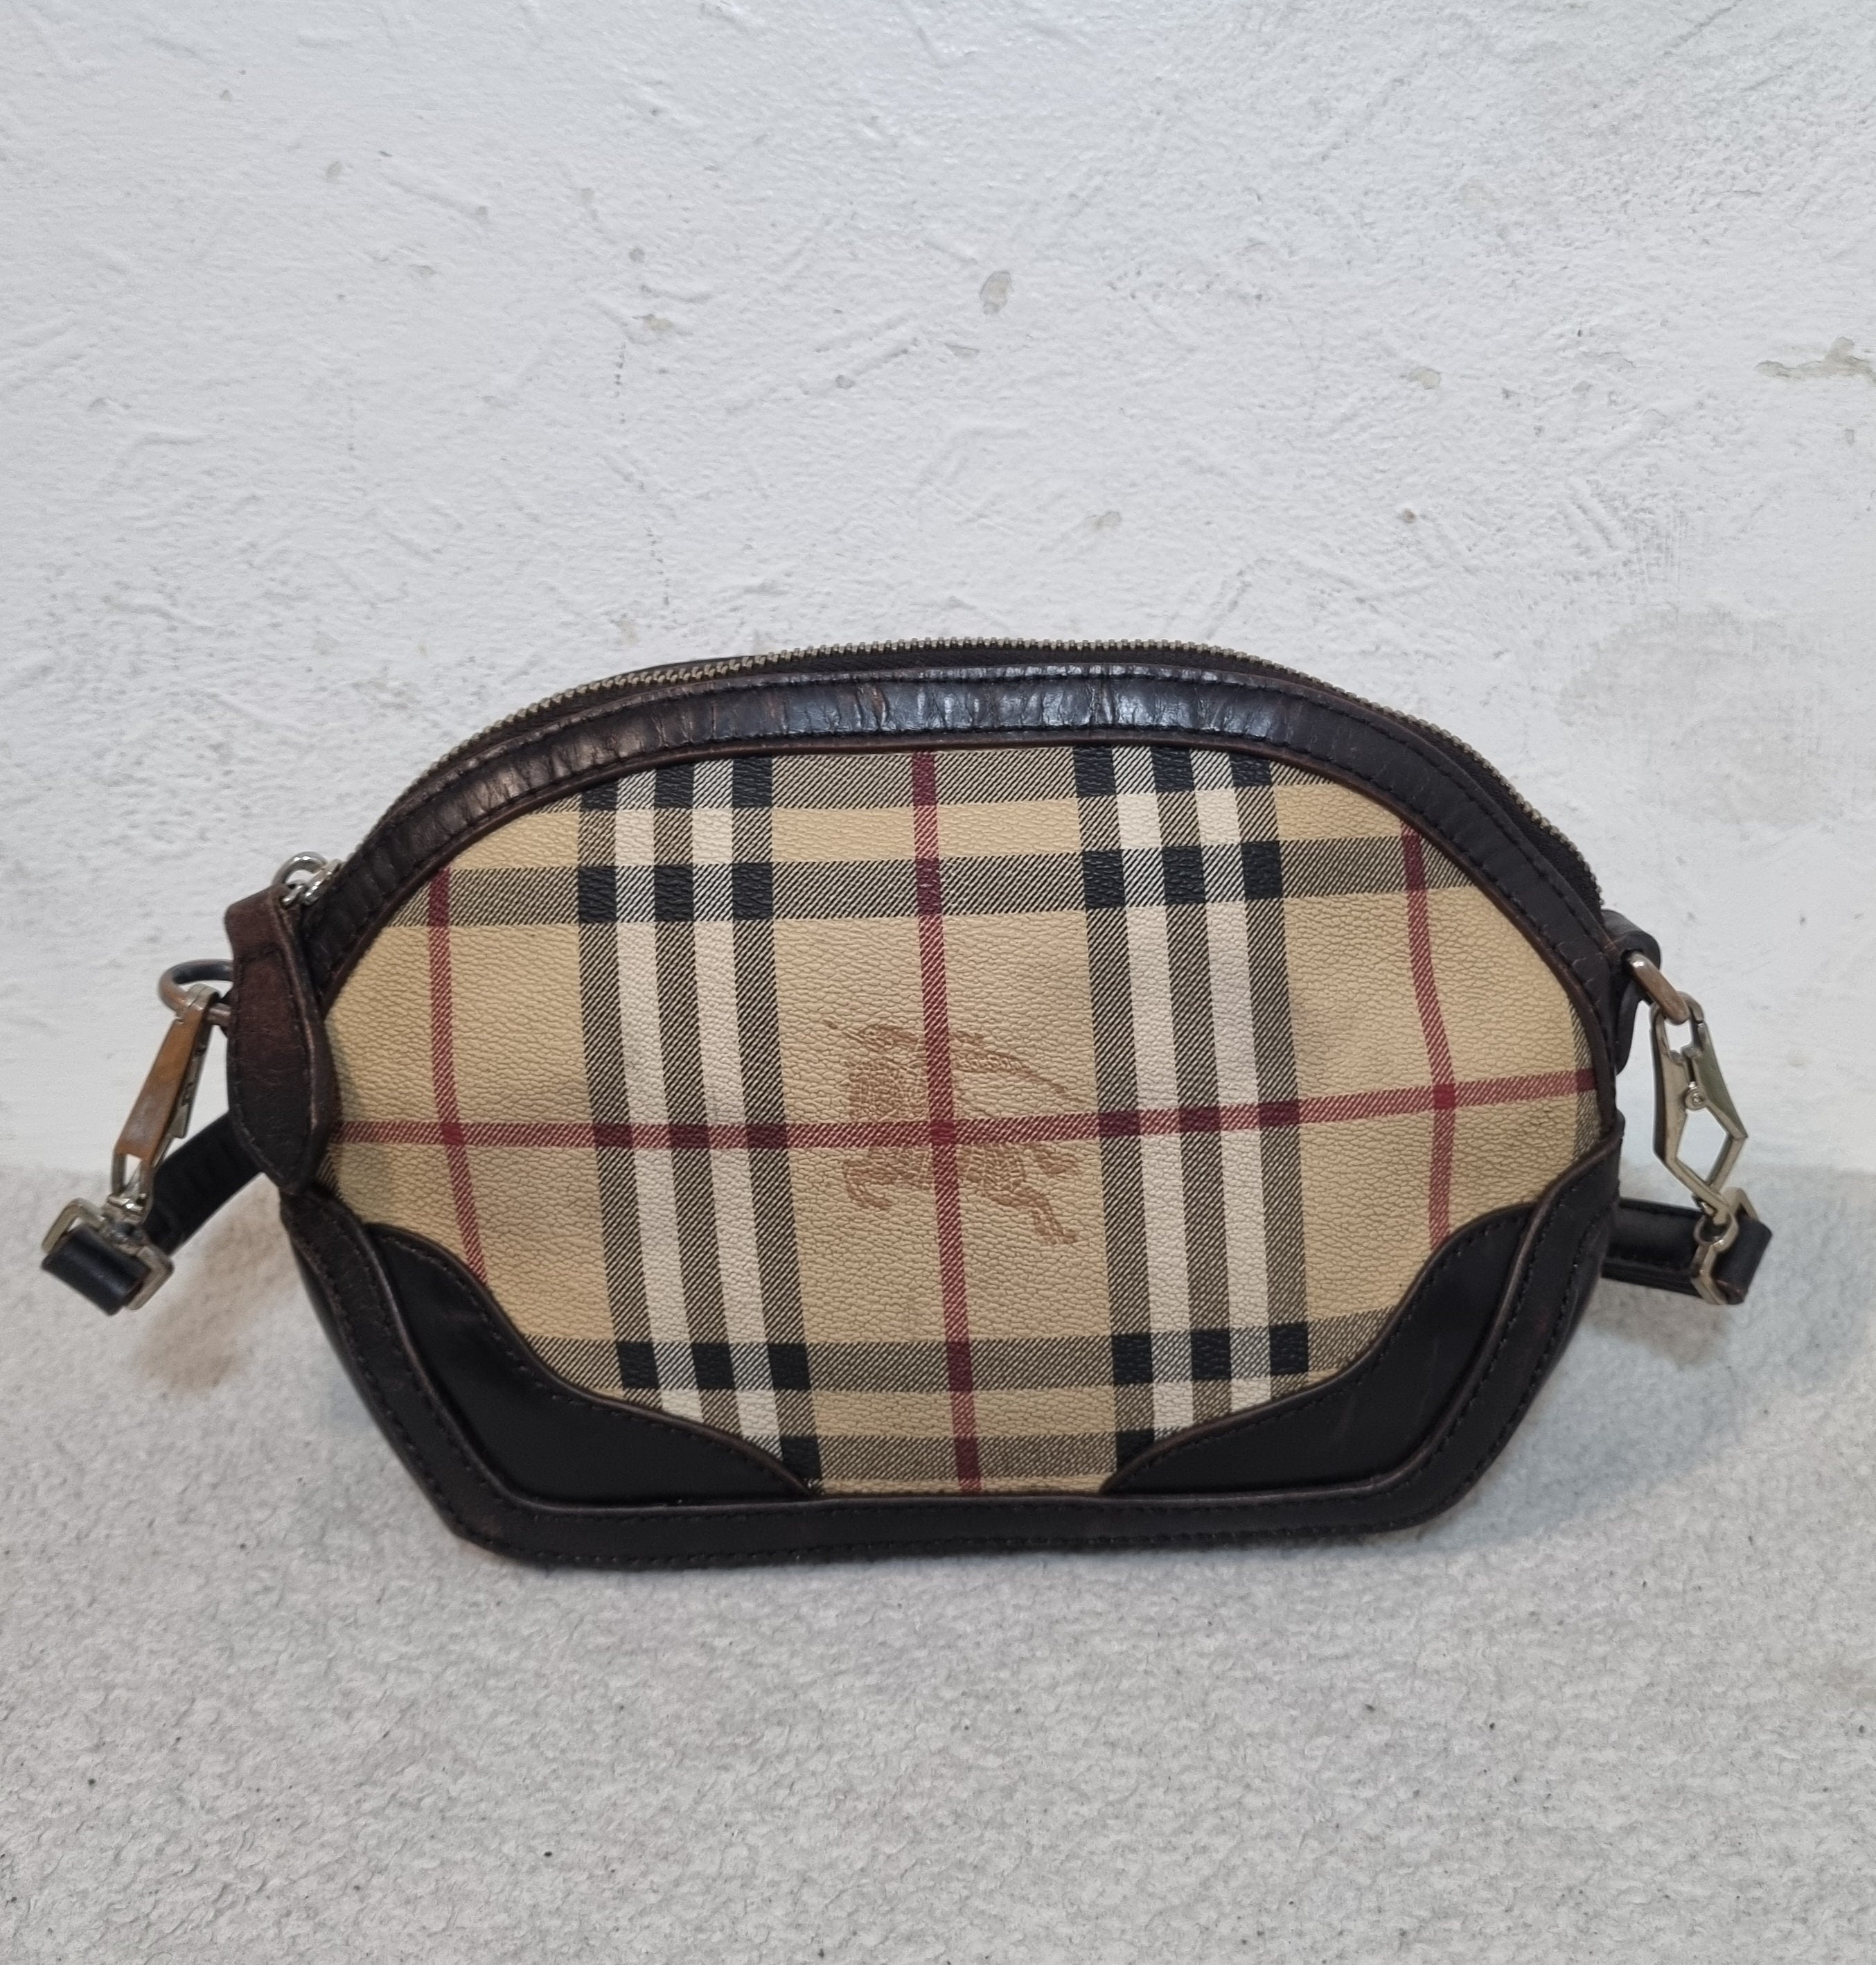 Burberry bags for sale in Swindon | Facebook Marketplace | Facebook